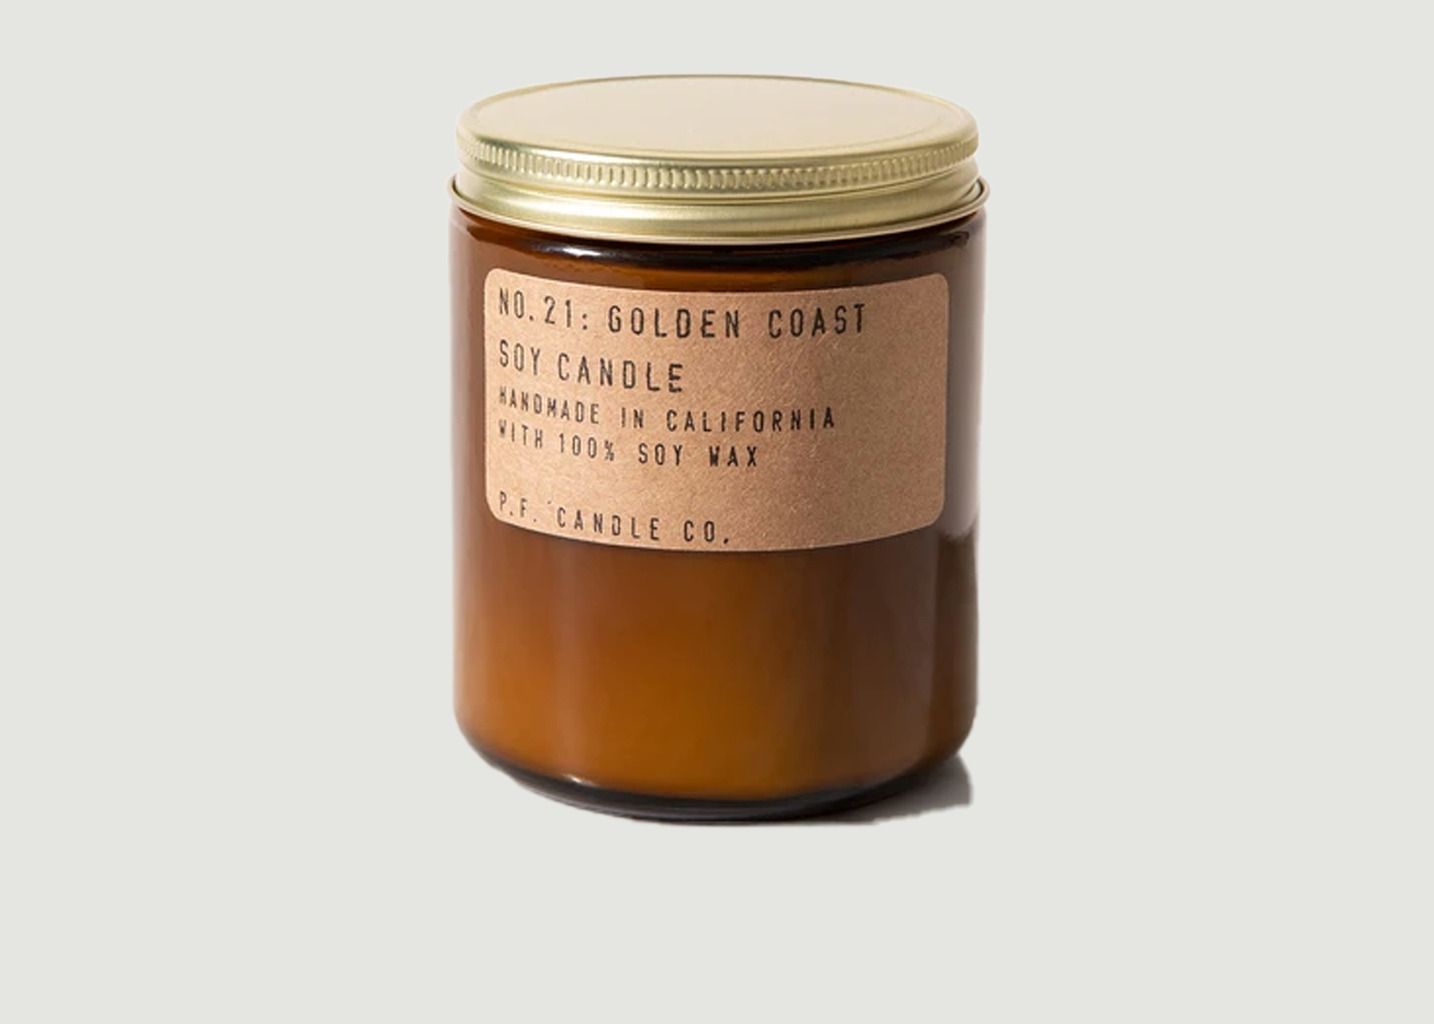 Bougie n°21 Golden Coast standard - P.F. Candle CO.